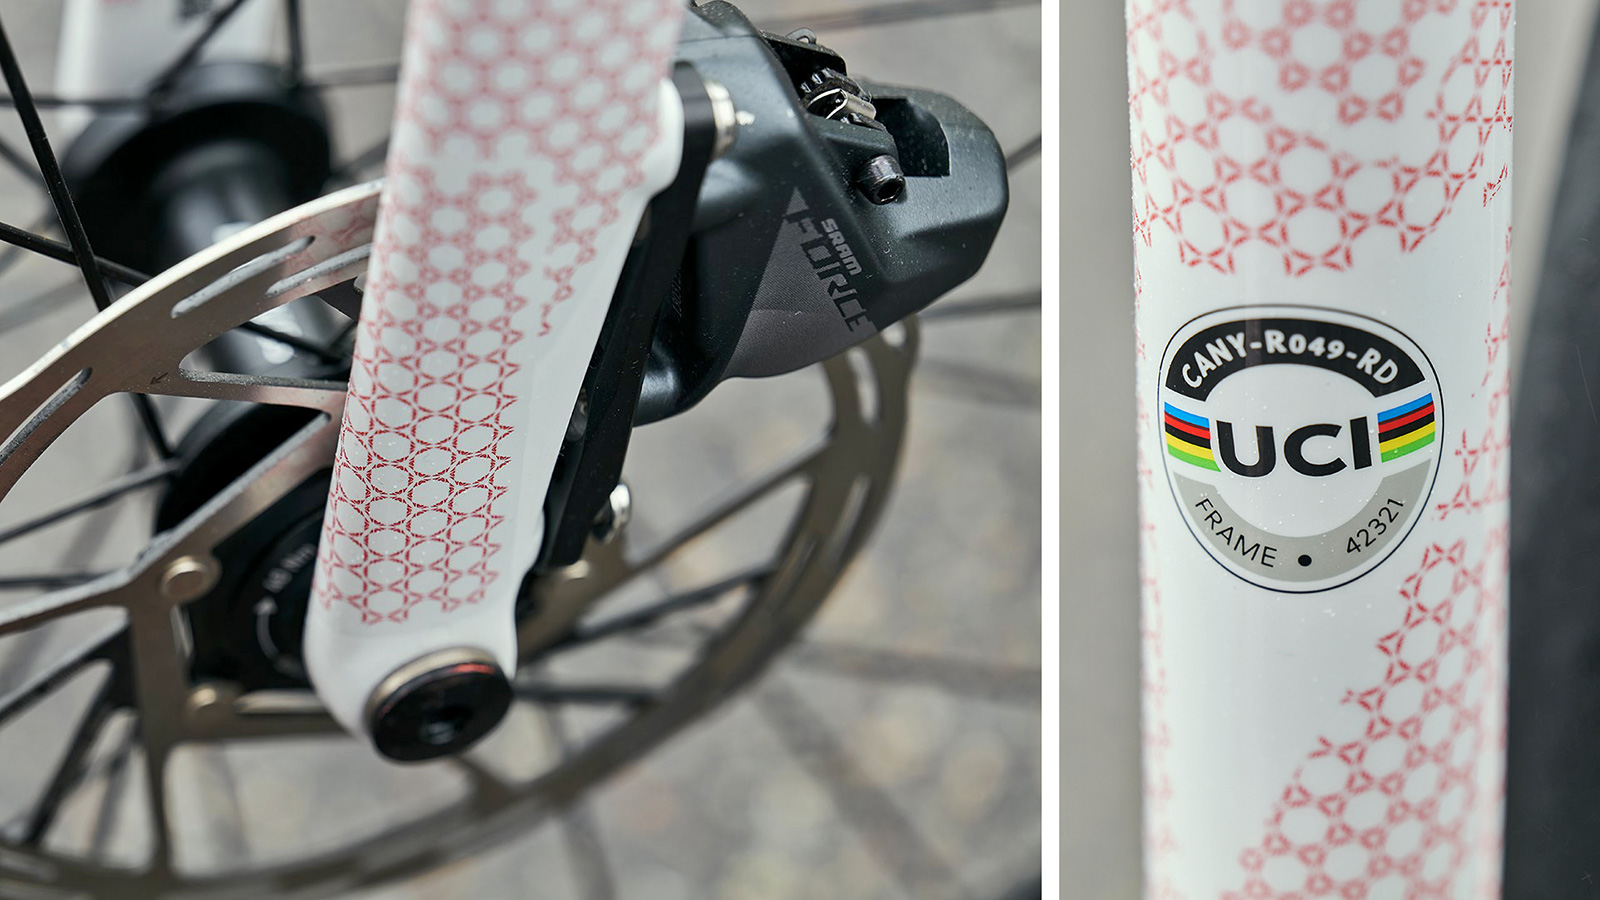 Canyon Ultimate CF SLX 8 Disc TDF limited edition carbon road bike, photo by Tino Pohlman, 108th Tour de France, details